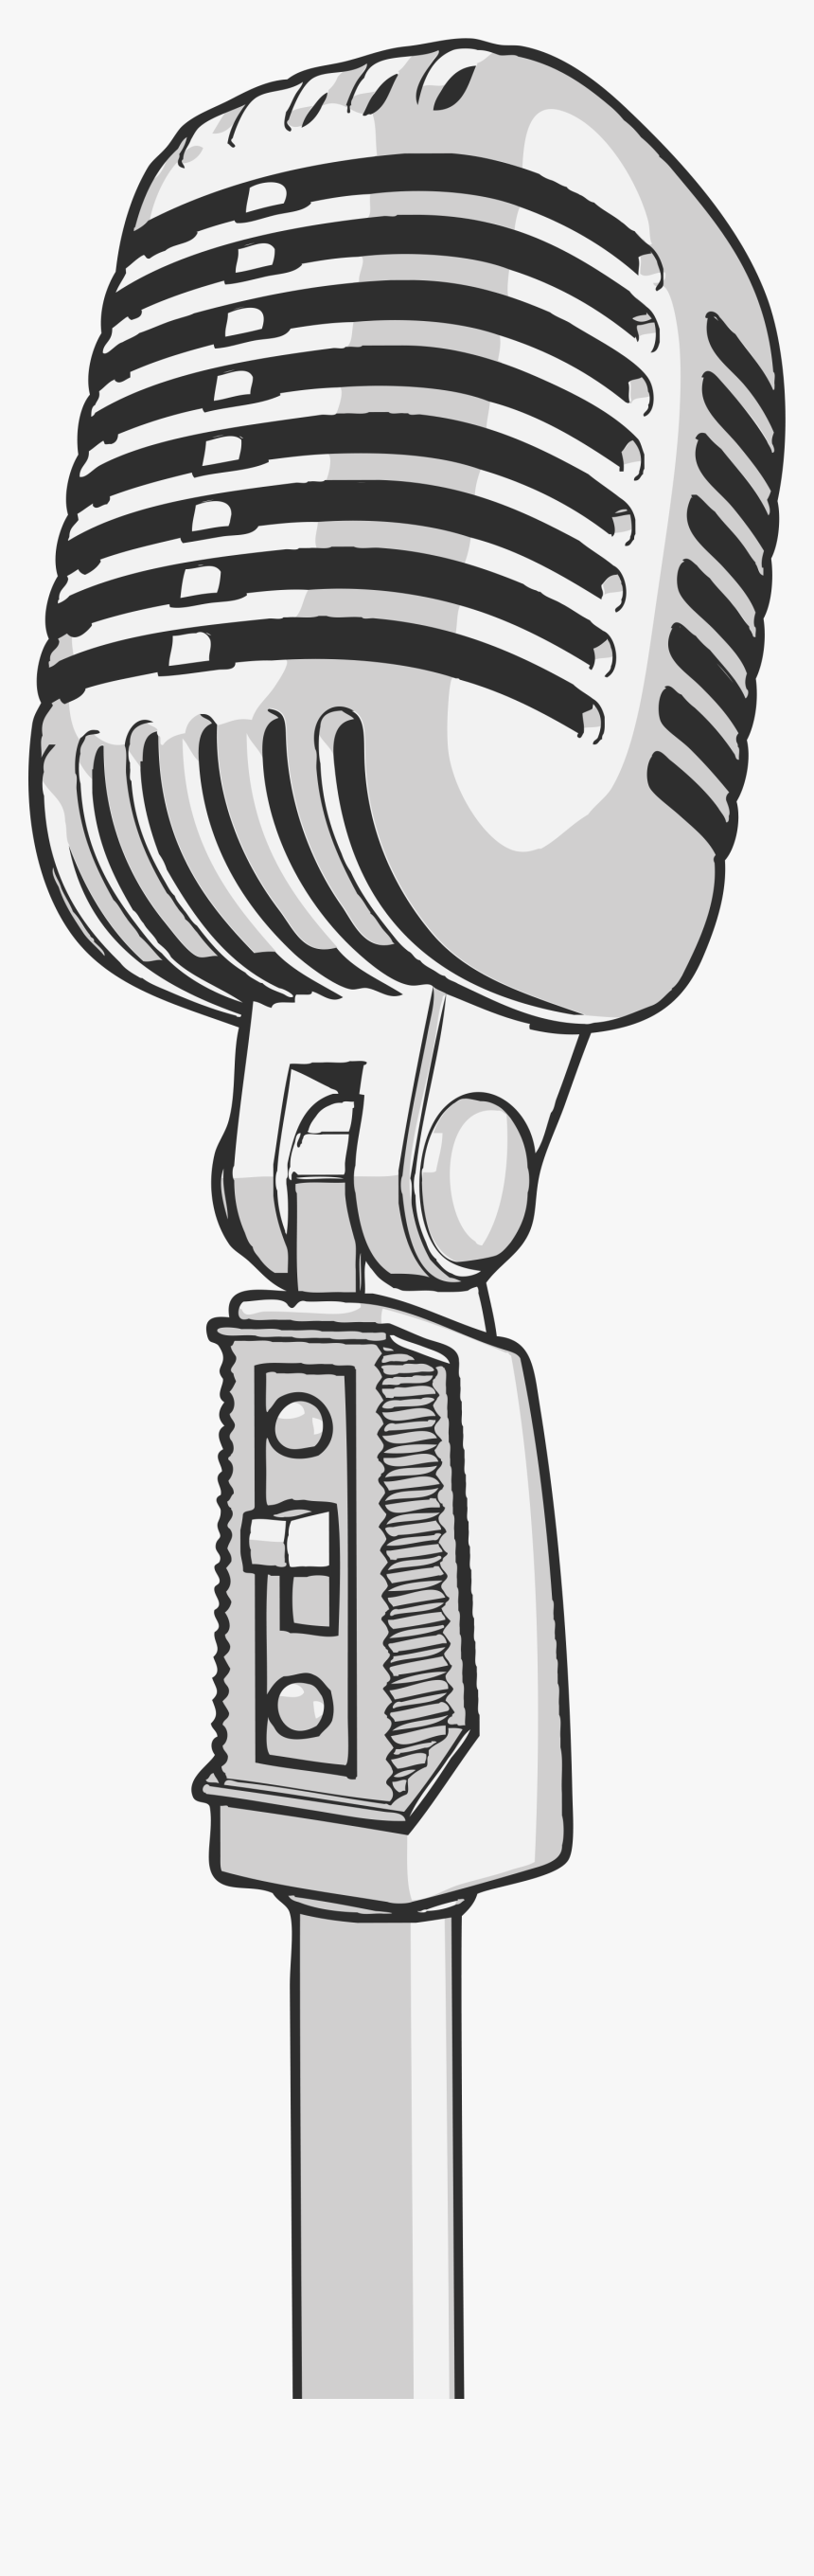 Transparent Microphone With Music Notes Clipart - Cartoon Transparent ...